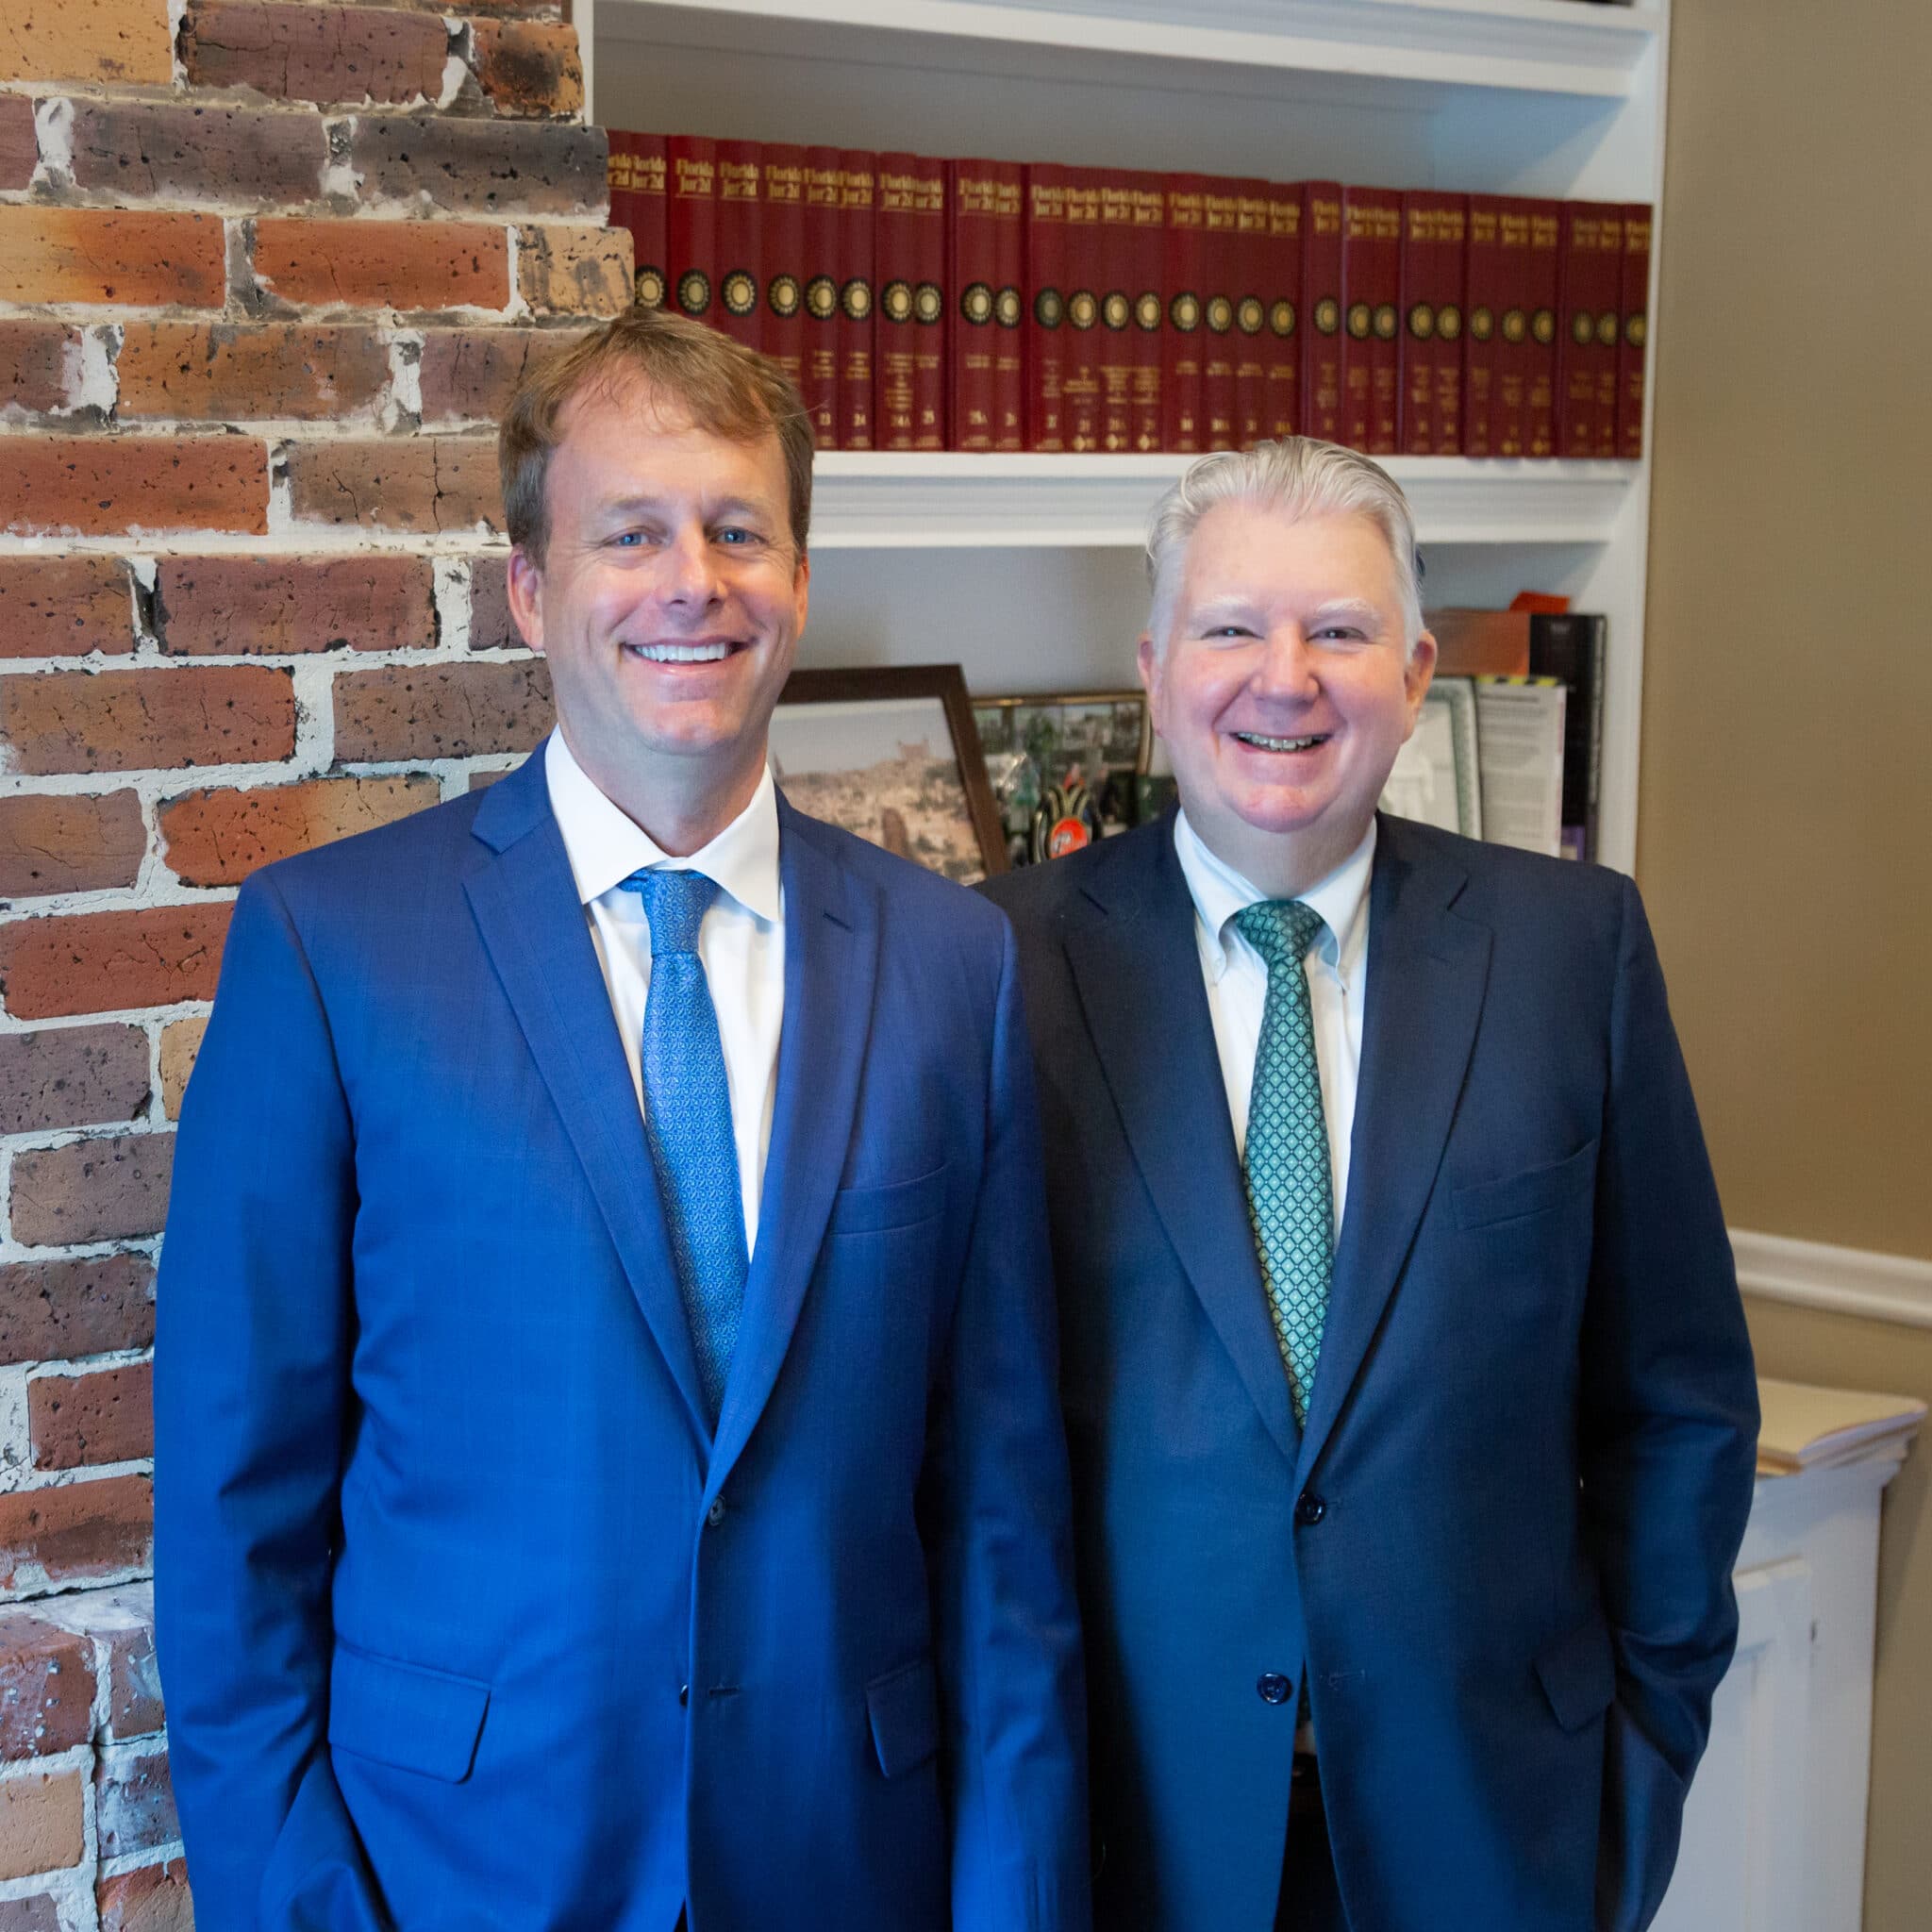 Two men in suits standing in front of a bookcase.